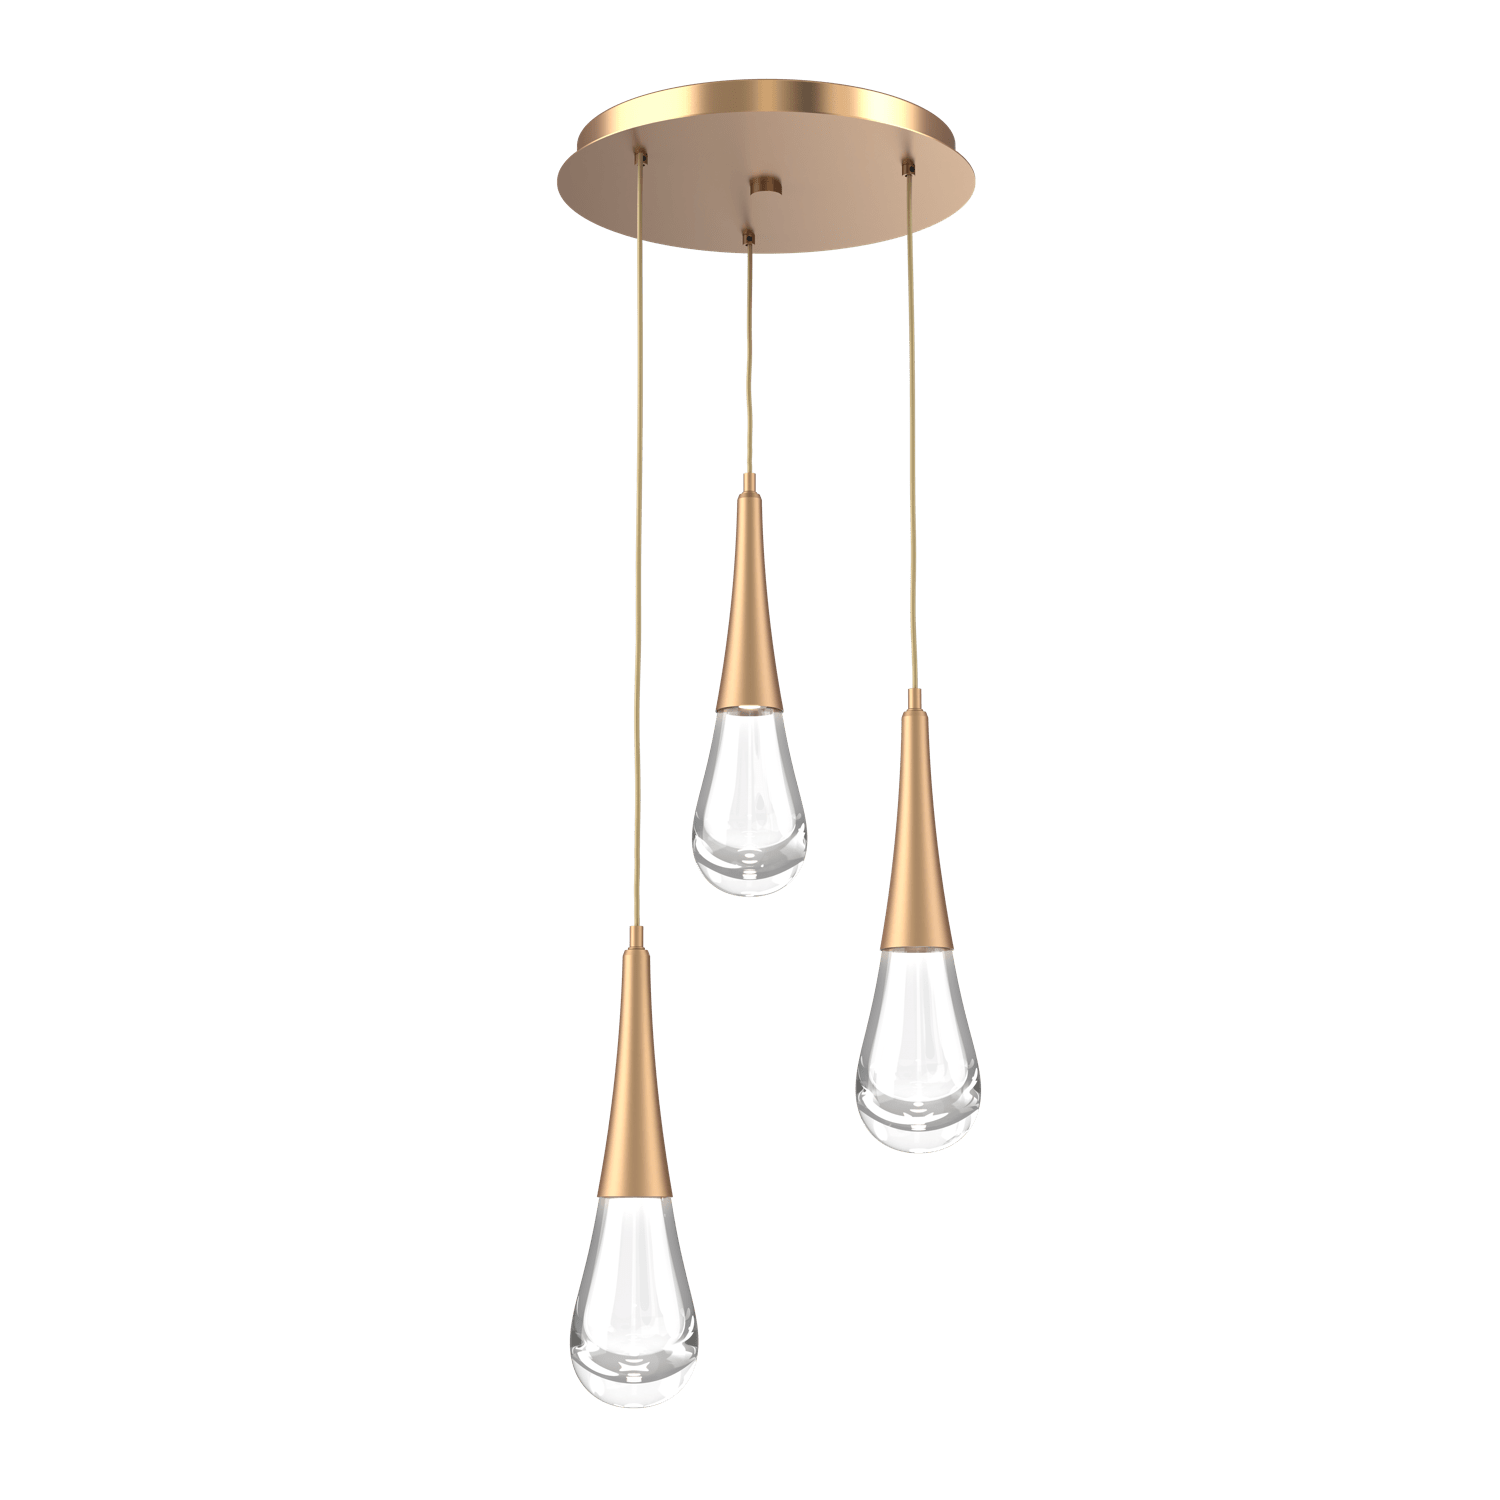 CHB0078-03-NB-Hammerton-Studio-Raindrop-3-light-round-pendant-chandelier-with-novel-brass-finish-and-clear-blown-glass-shades-and-LED-lamping